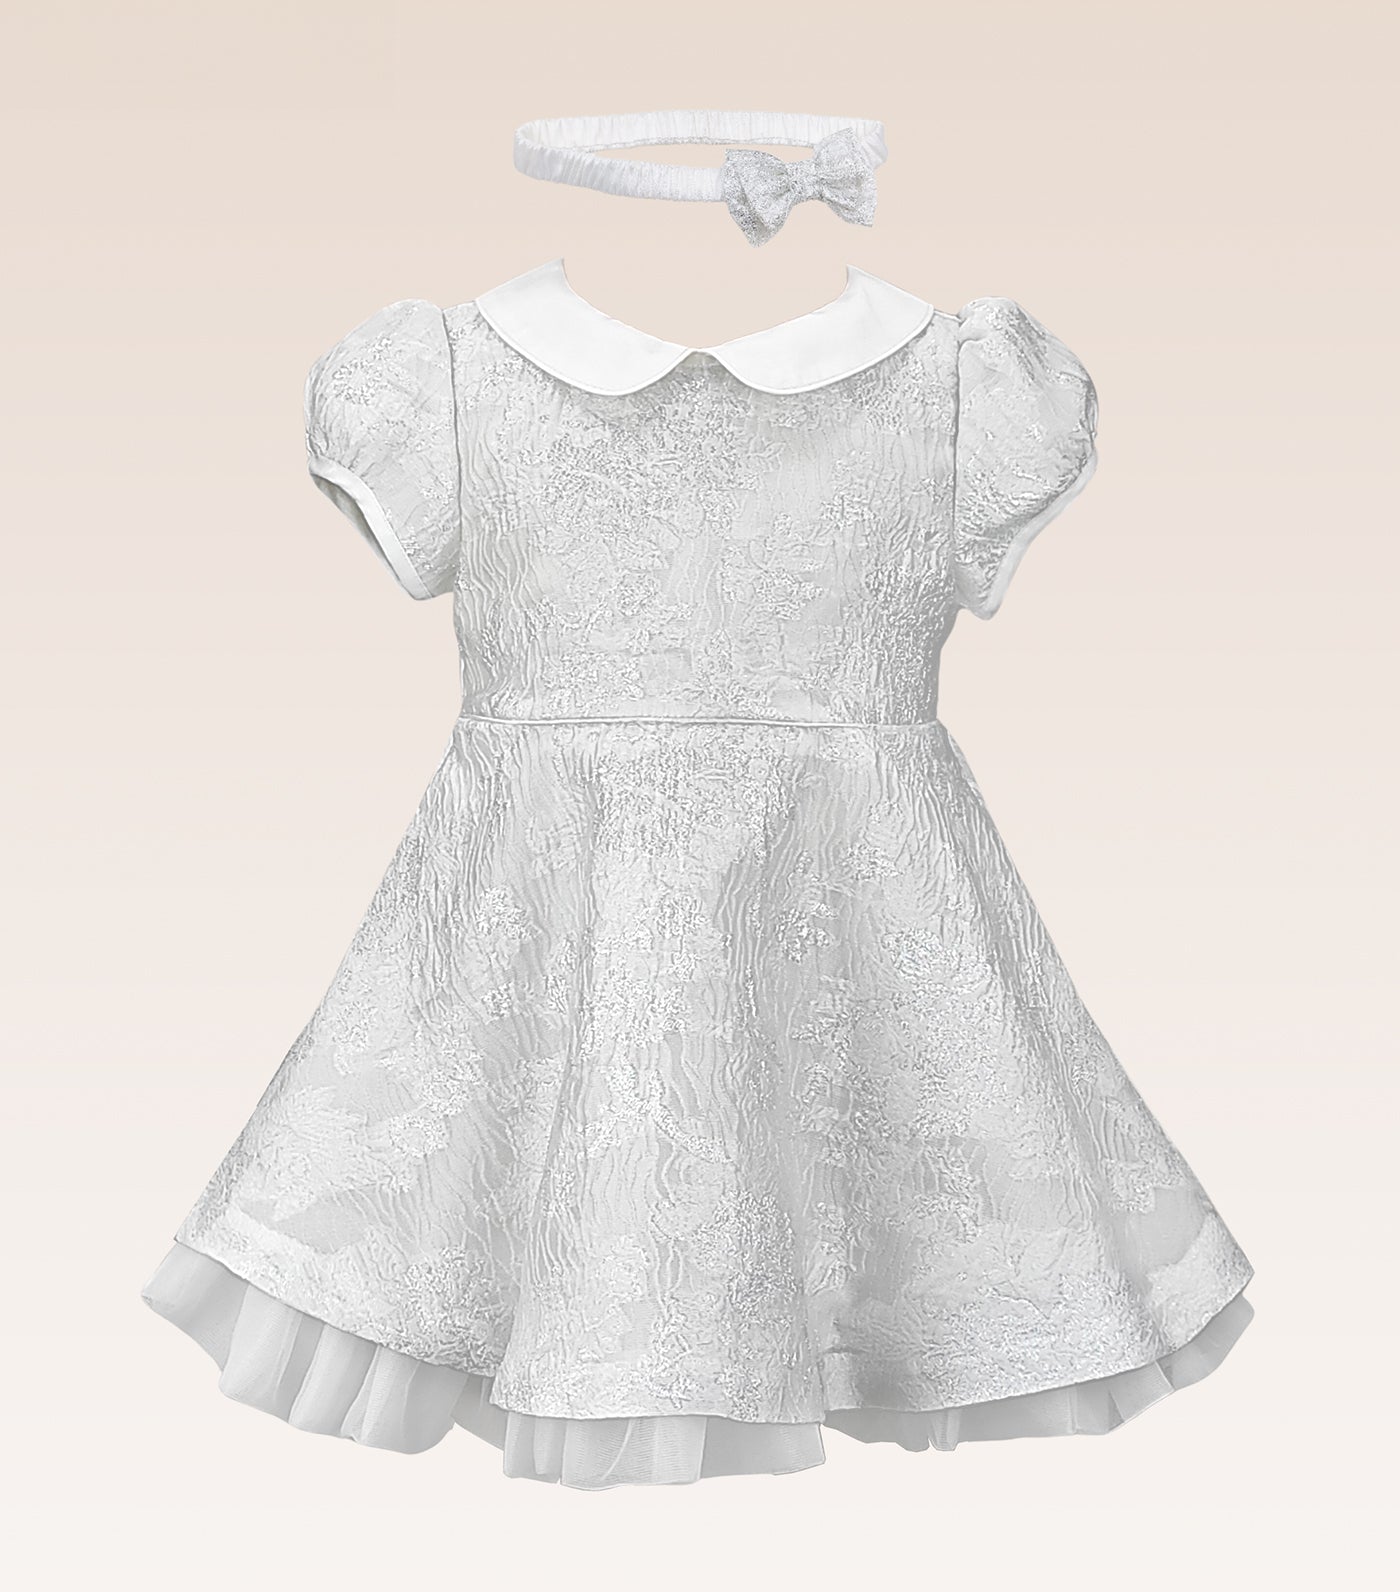 Georgette Baby Girls Silver Jacquard Party Dress with Tulle Underlay Skirt